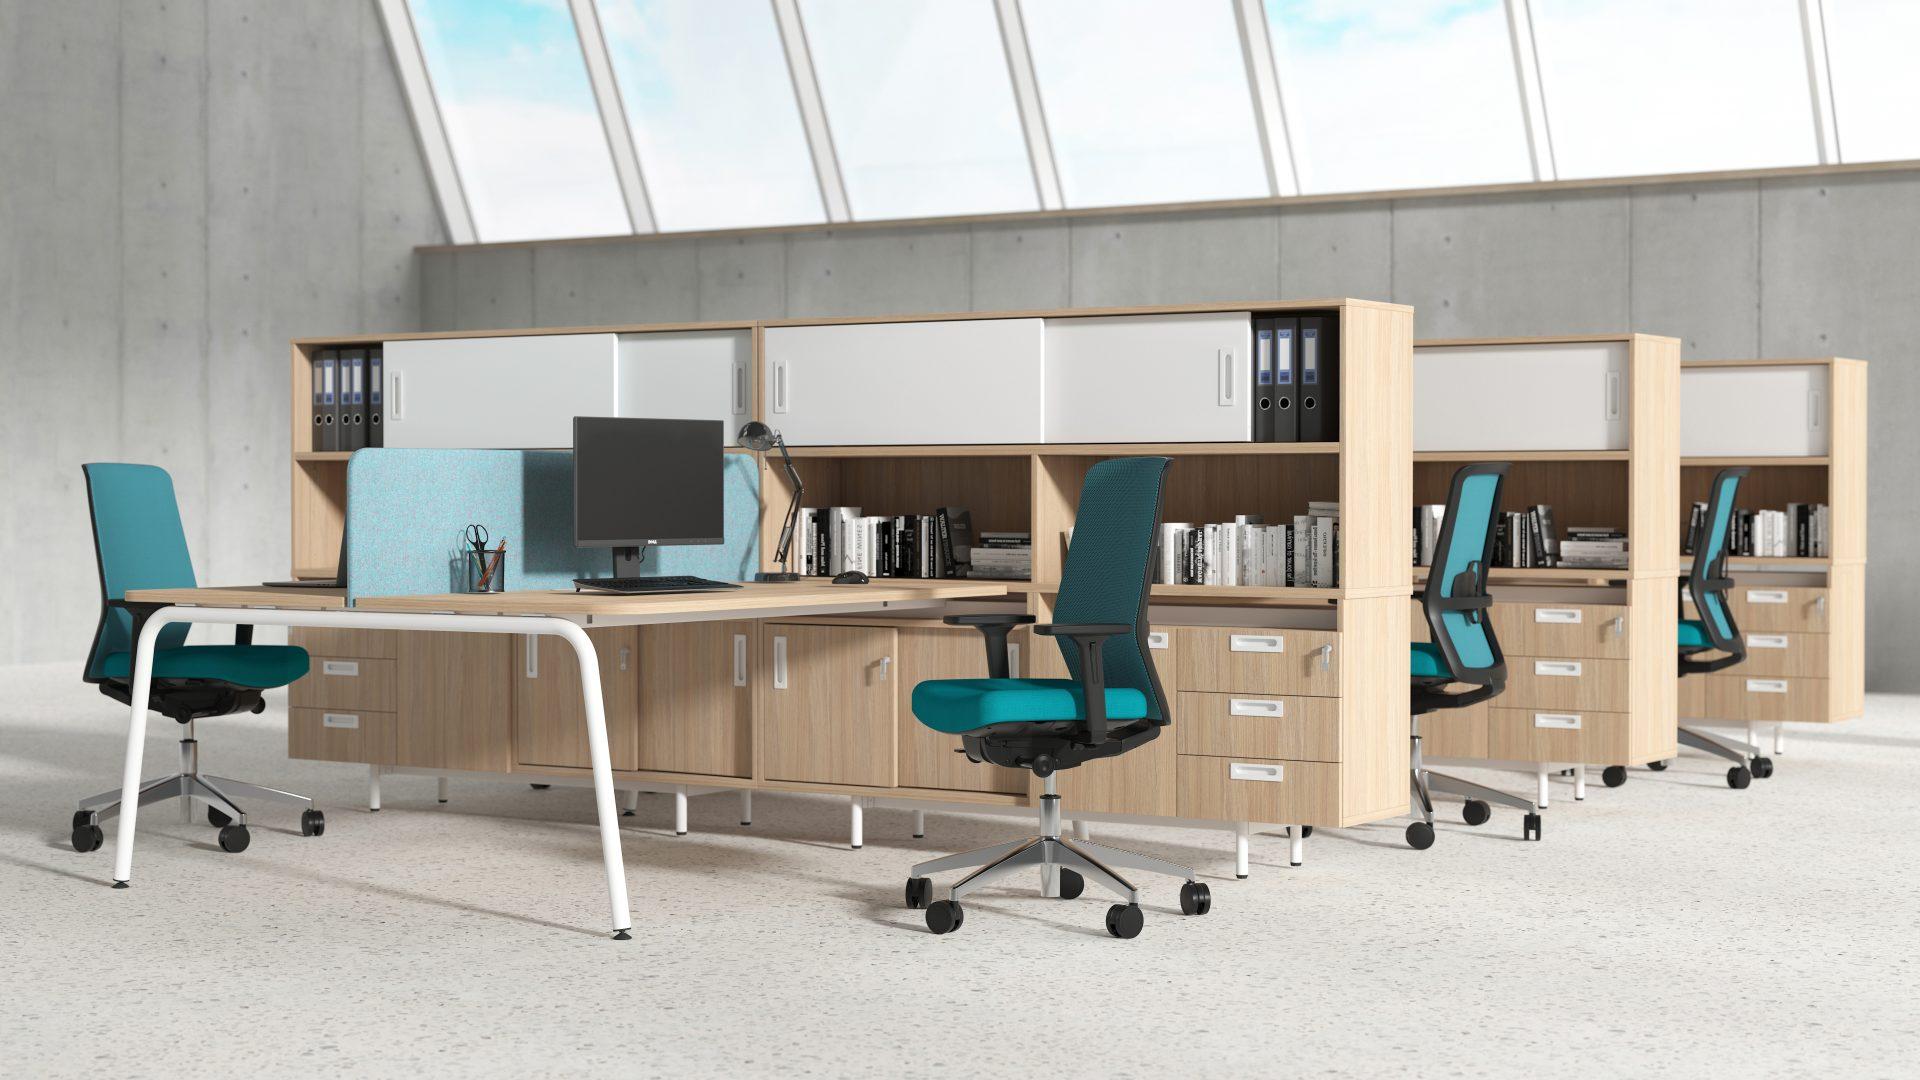 Round workstations combine bench desks with storage cabinets and drawers